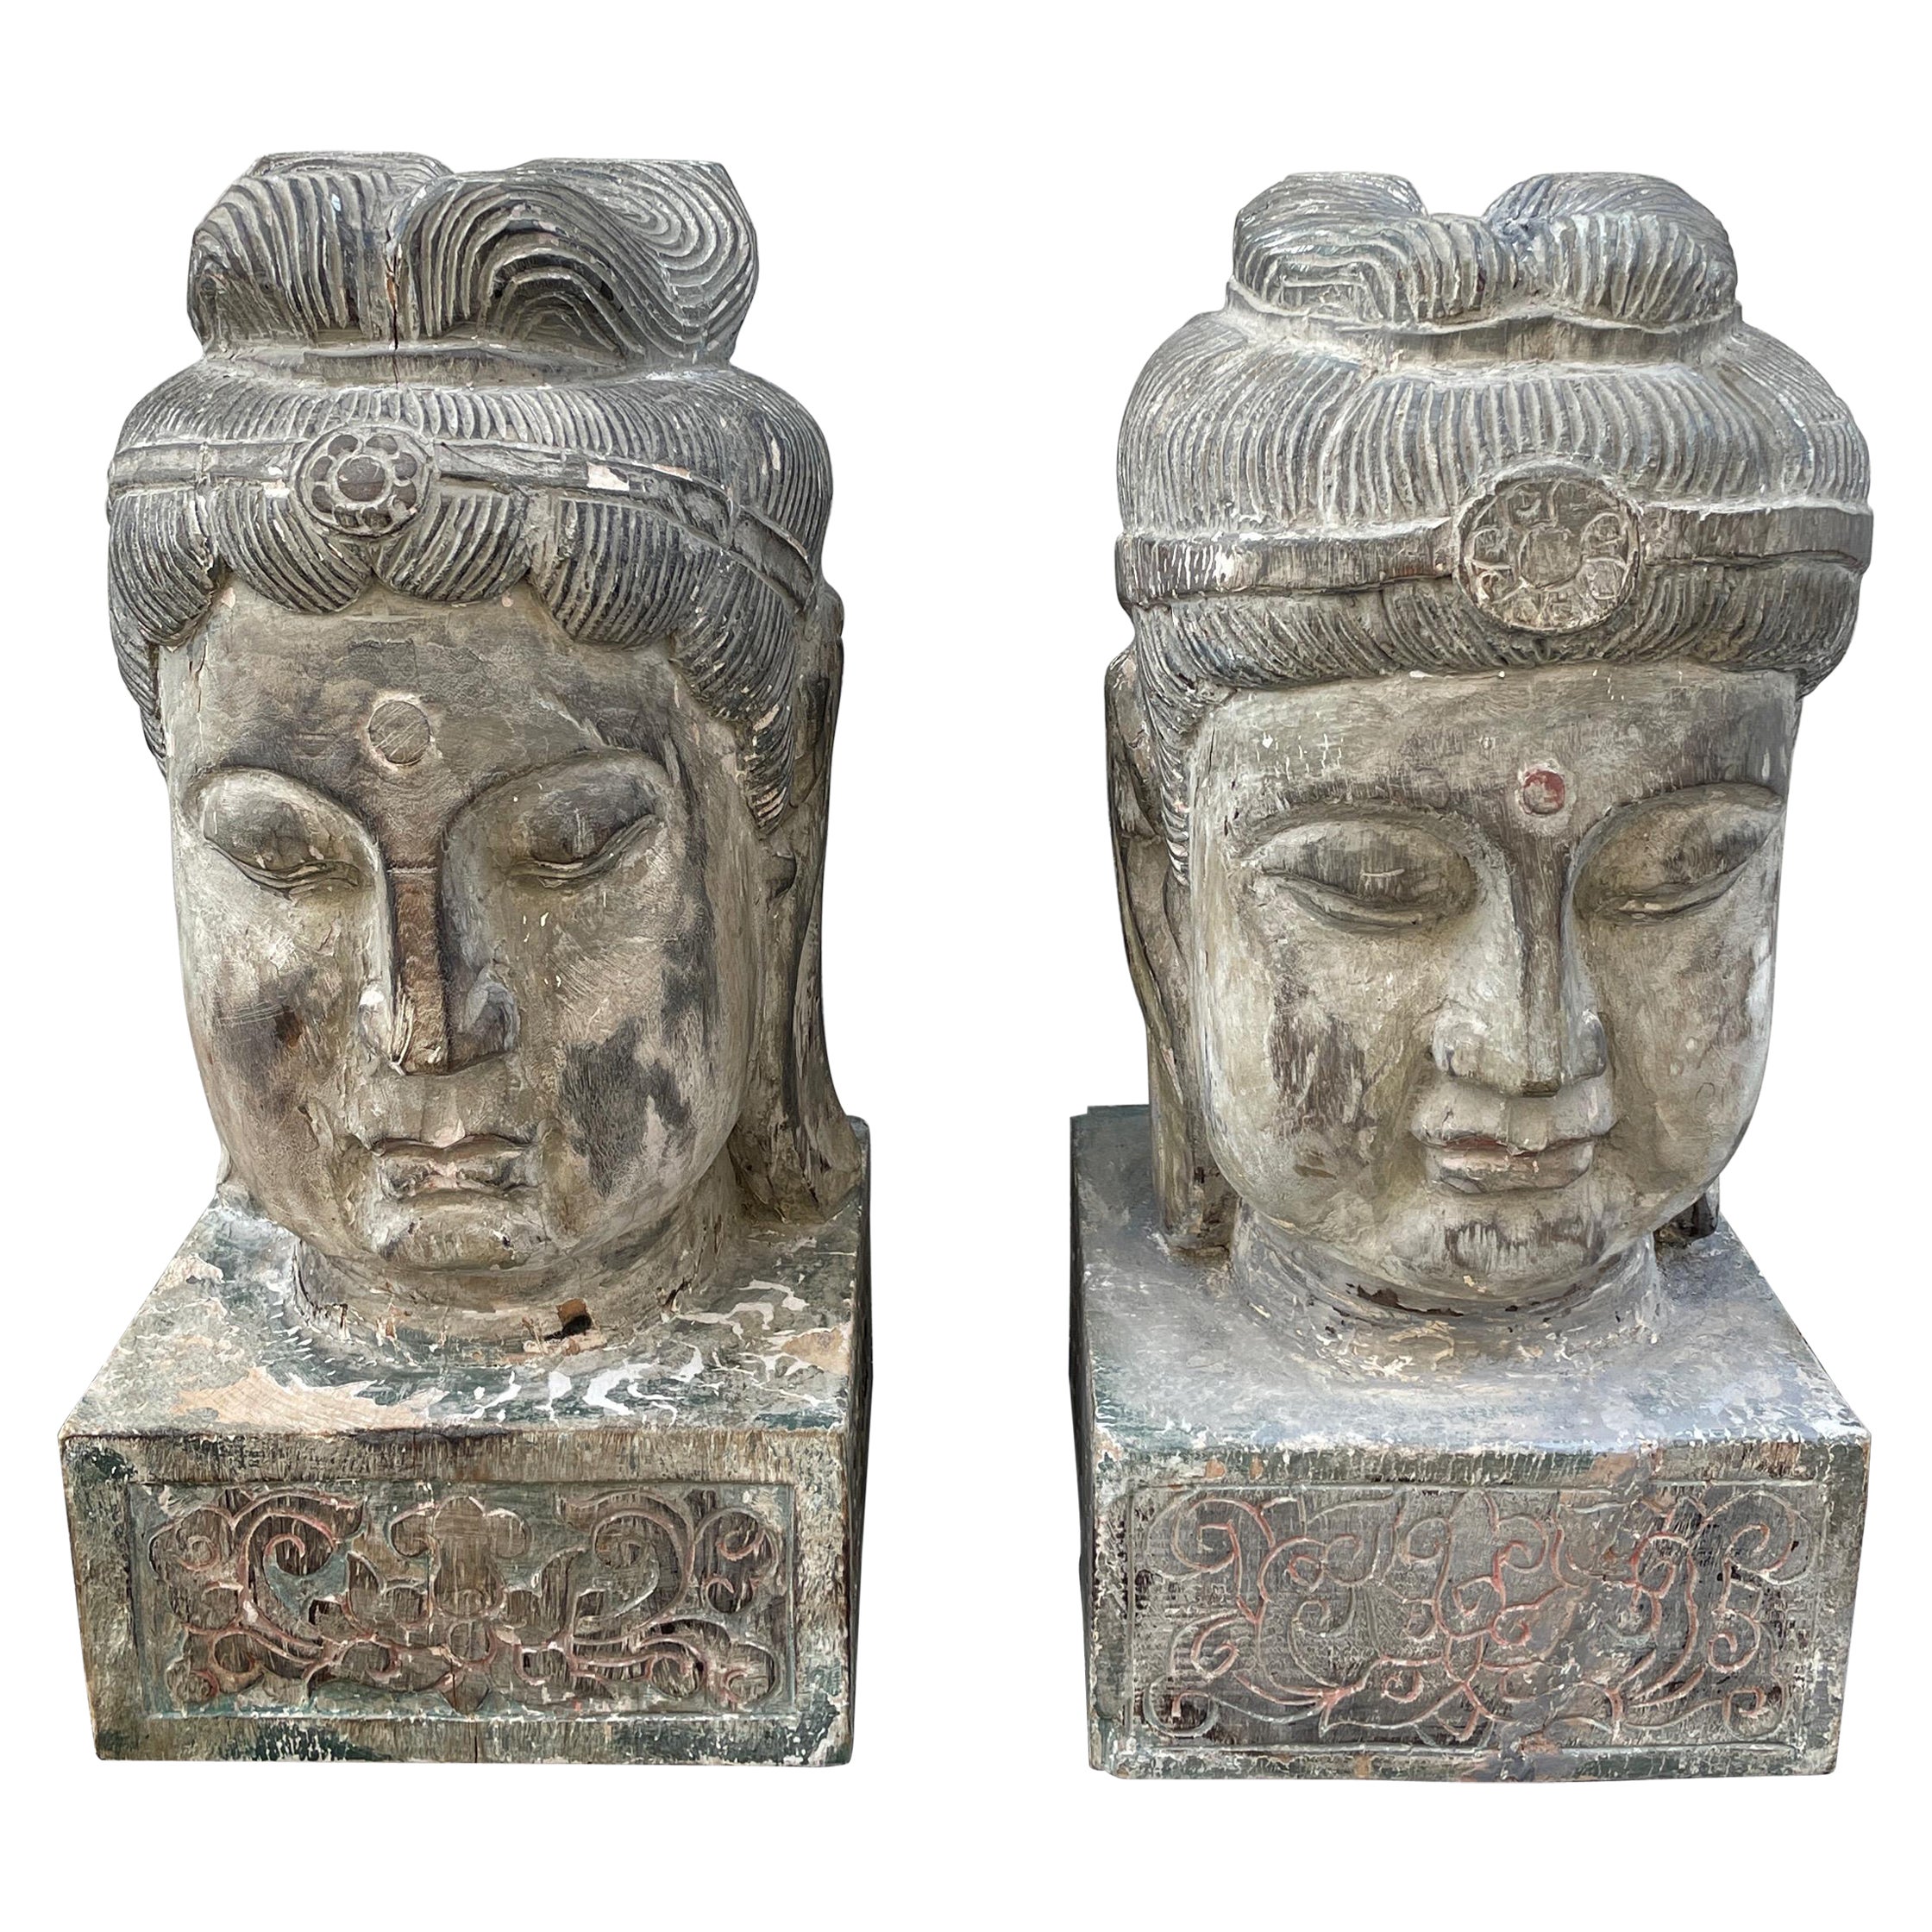 Pair of Carved Wood Buddha Head Sculptures